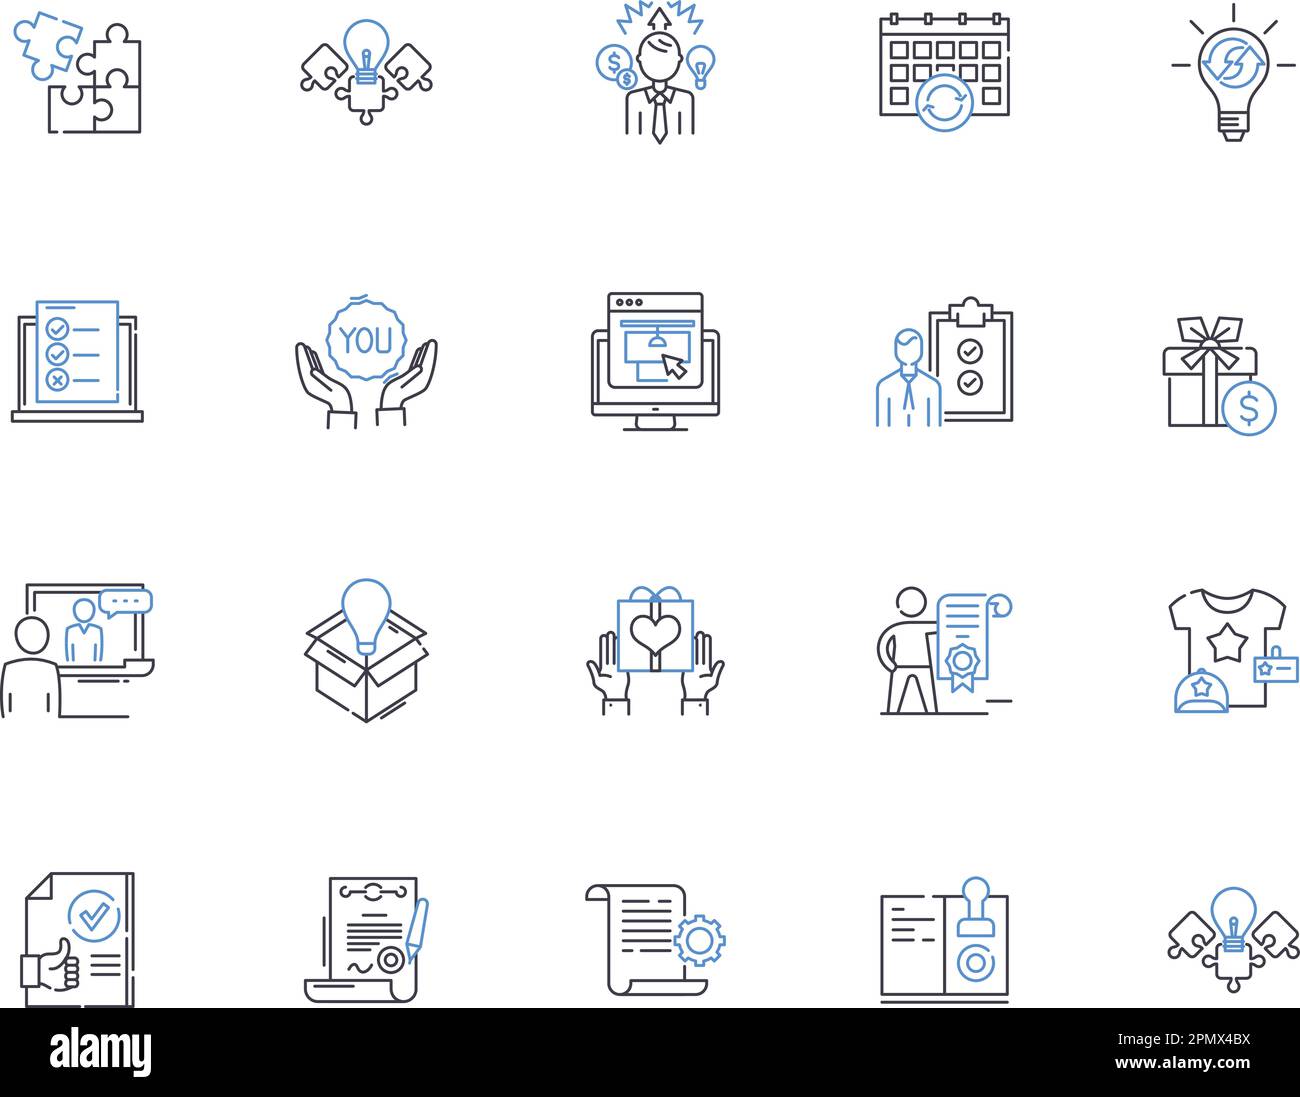 Marketing strategy outline icons collection. Brand, Promotion, Advertising, Targeting, Positioning, Segmentation, Redesign vector and illustration Stock Vector